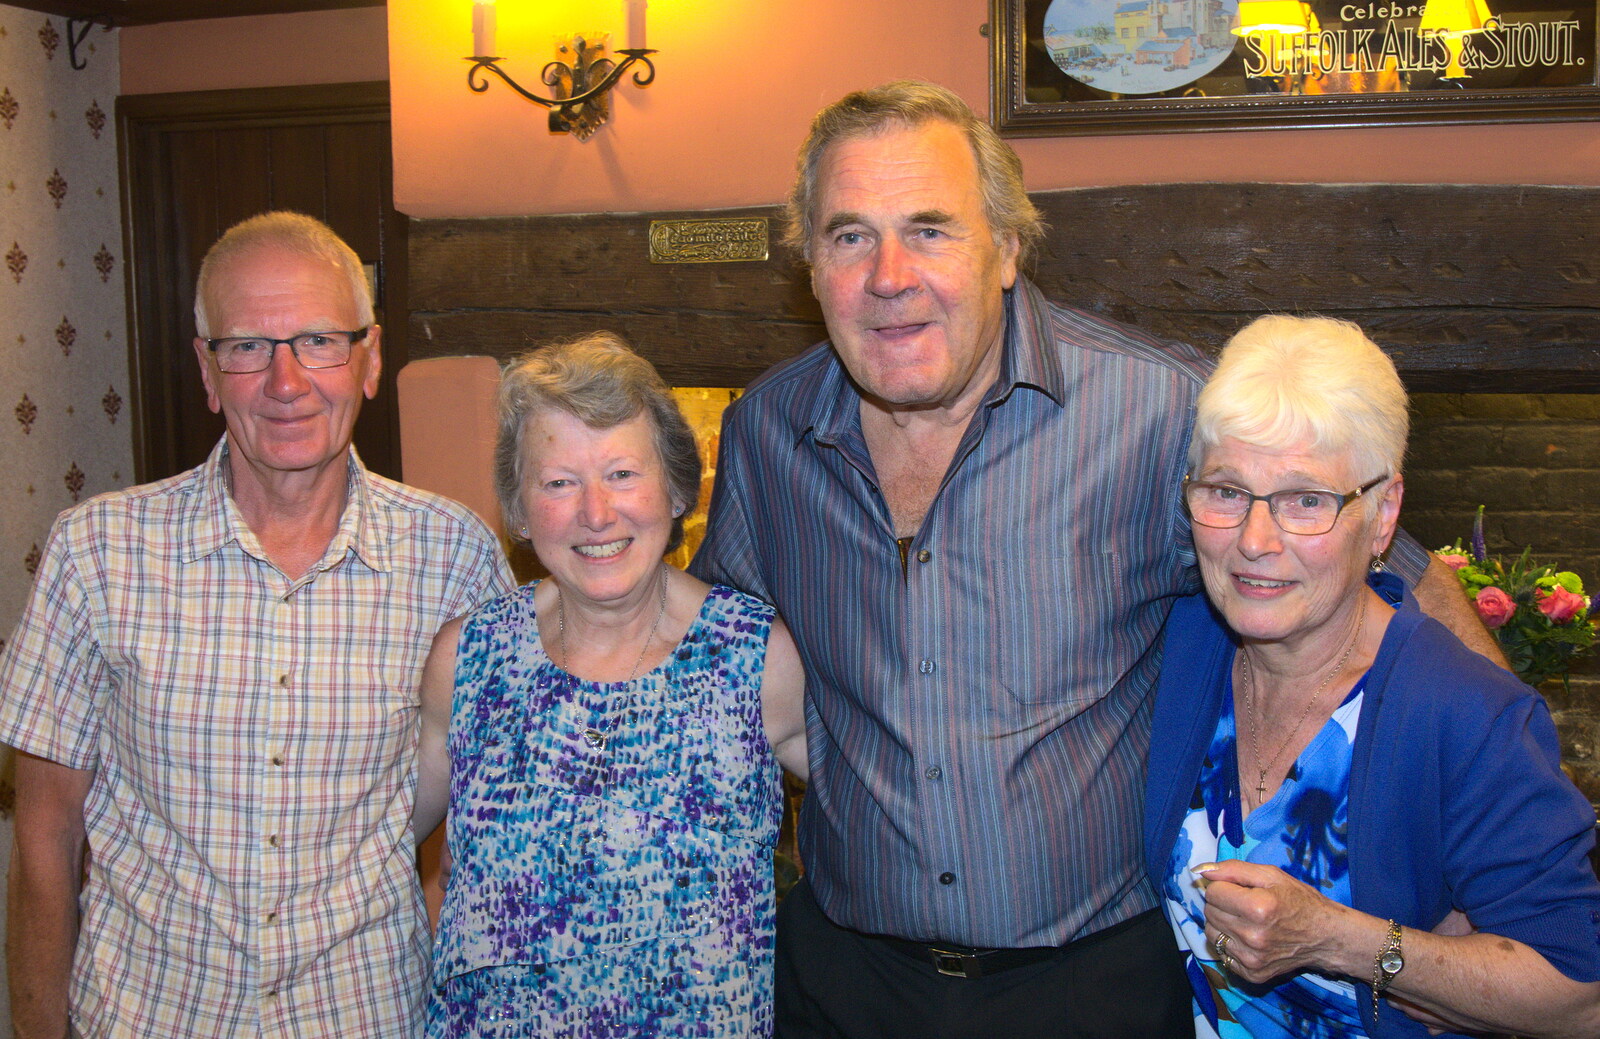 John Willy, Sylvia, Alan and Spammy from A Retirement: The Last Night of The Swan Inn, Brome, Suffolk - 3rd June 2017